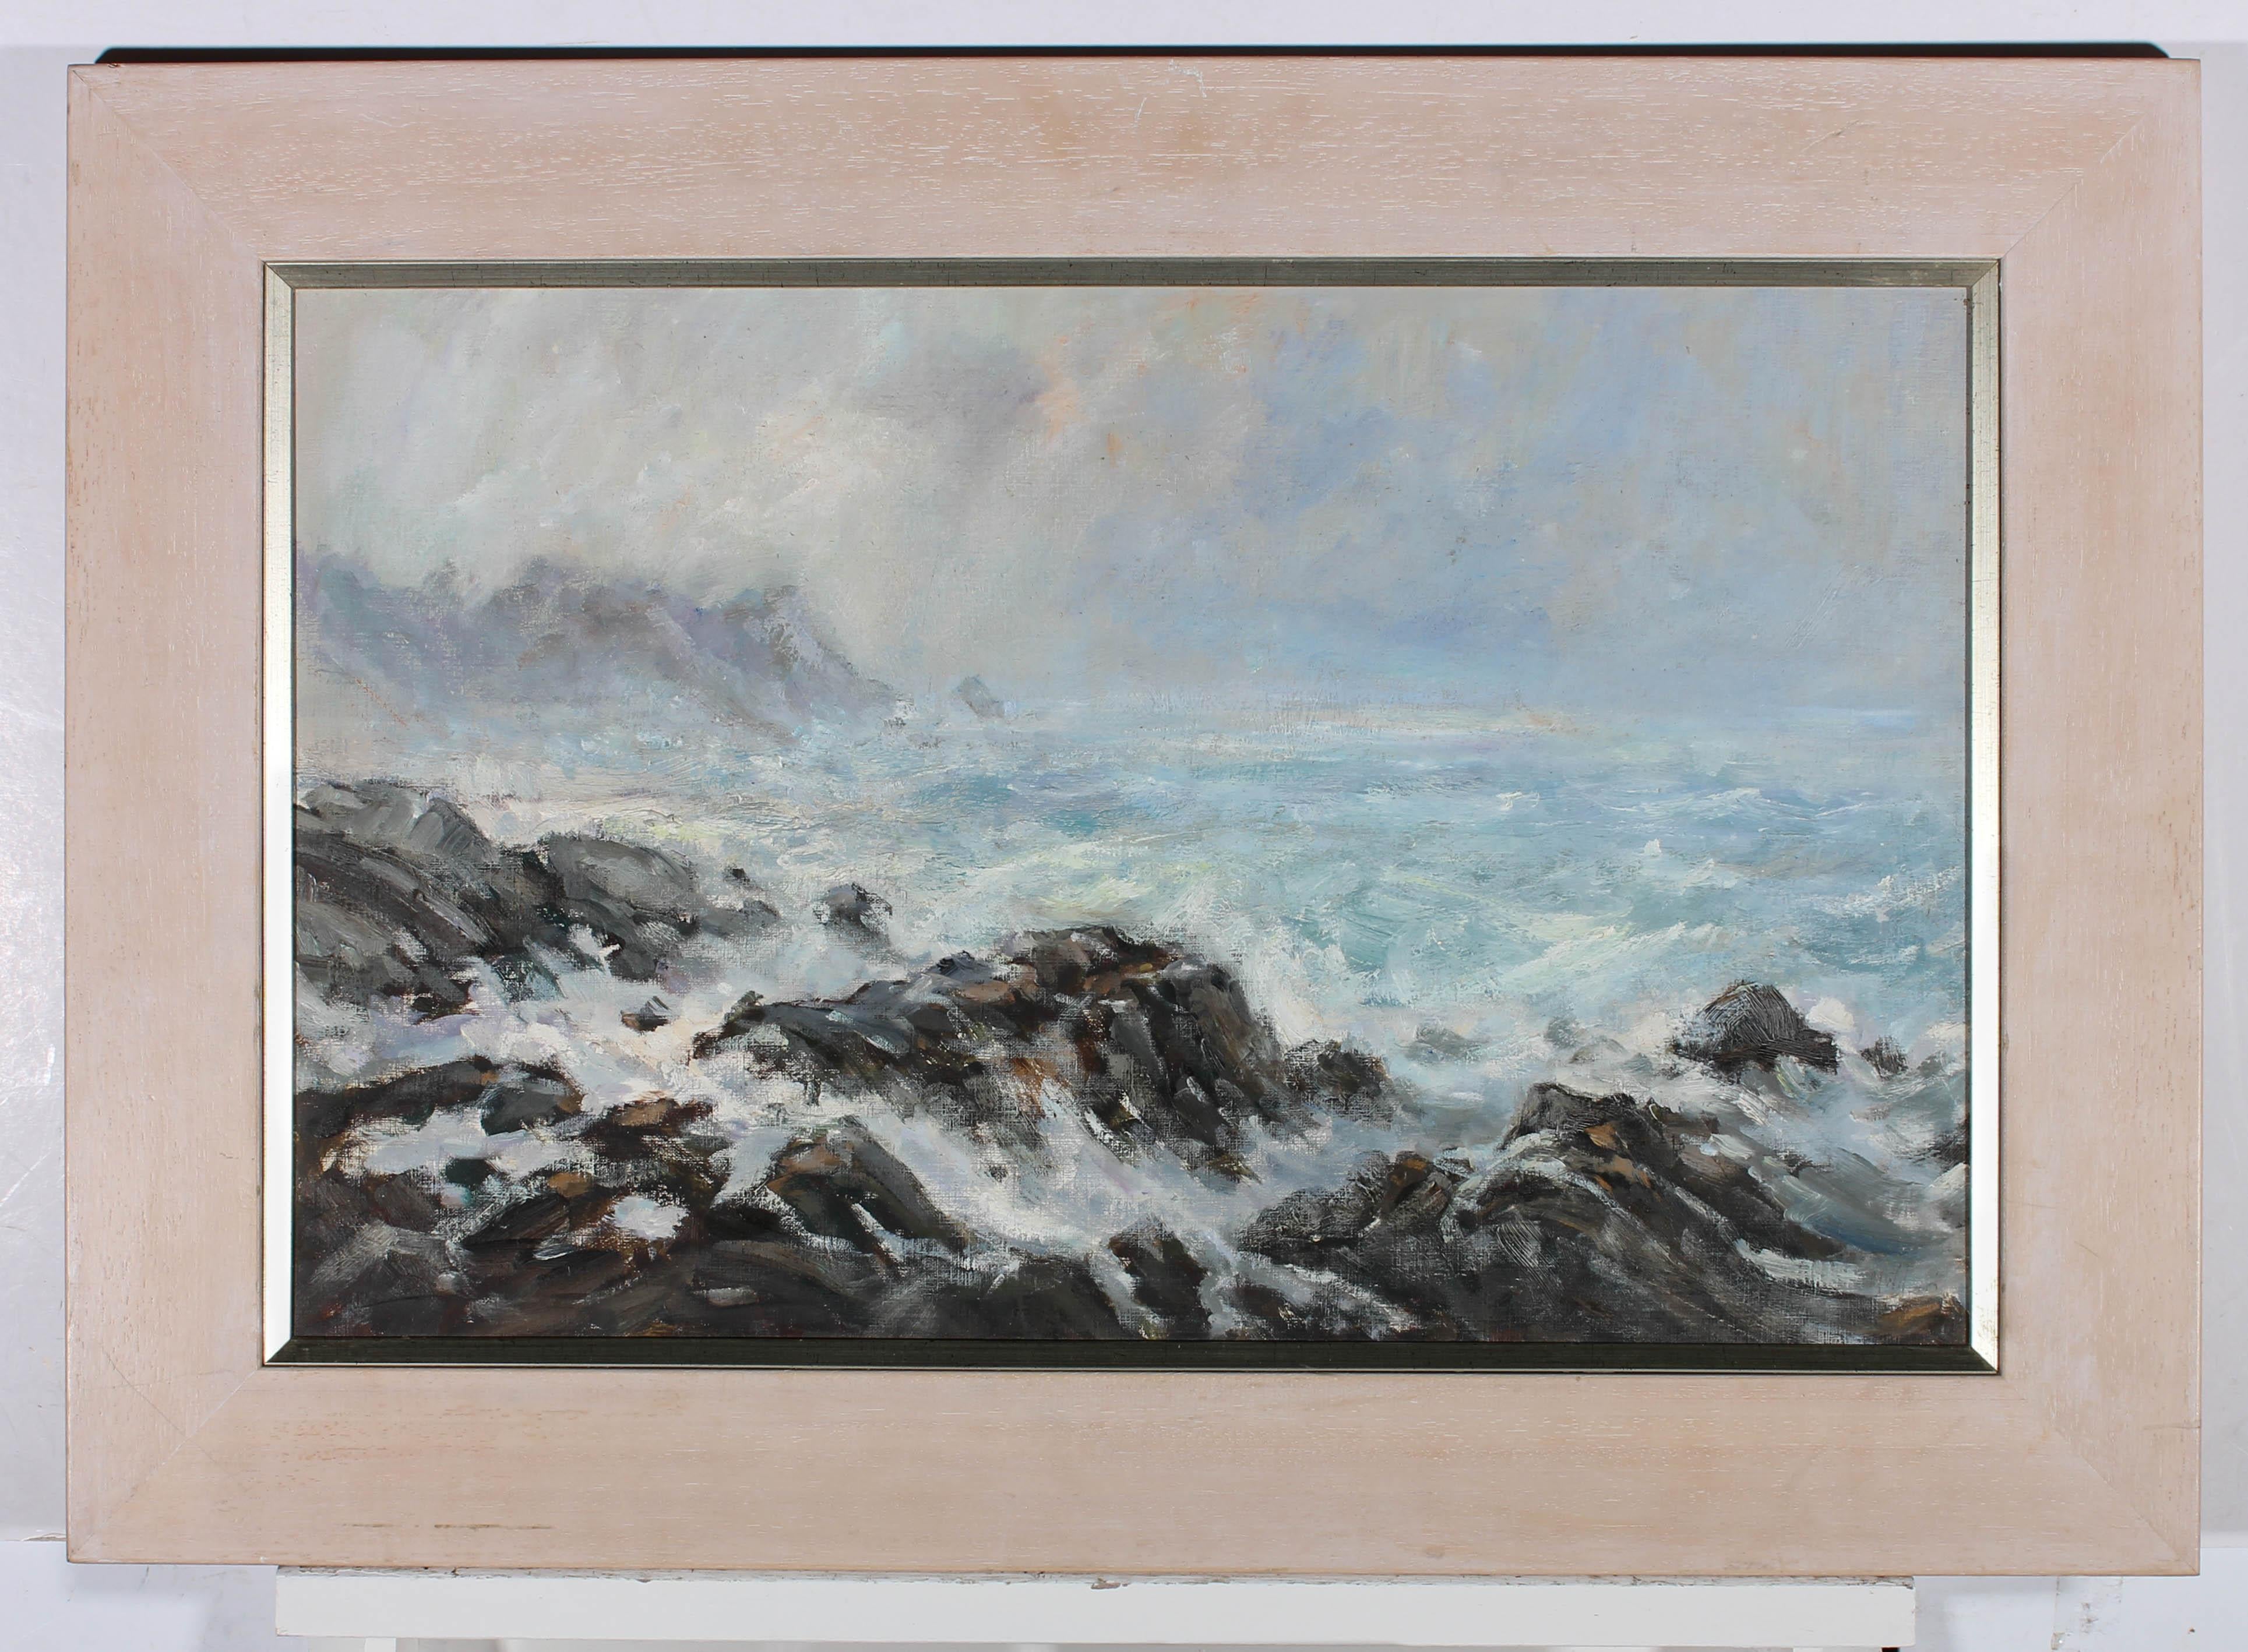 This delightful seascape depicts choppy waves crashing against a rocky coastline. The artist has used an impasto technique to capture the movement of the rough sea spray. Signed to the lower right-hand corner. The painting is well presented in a